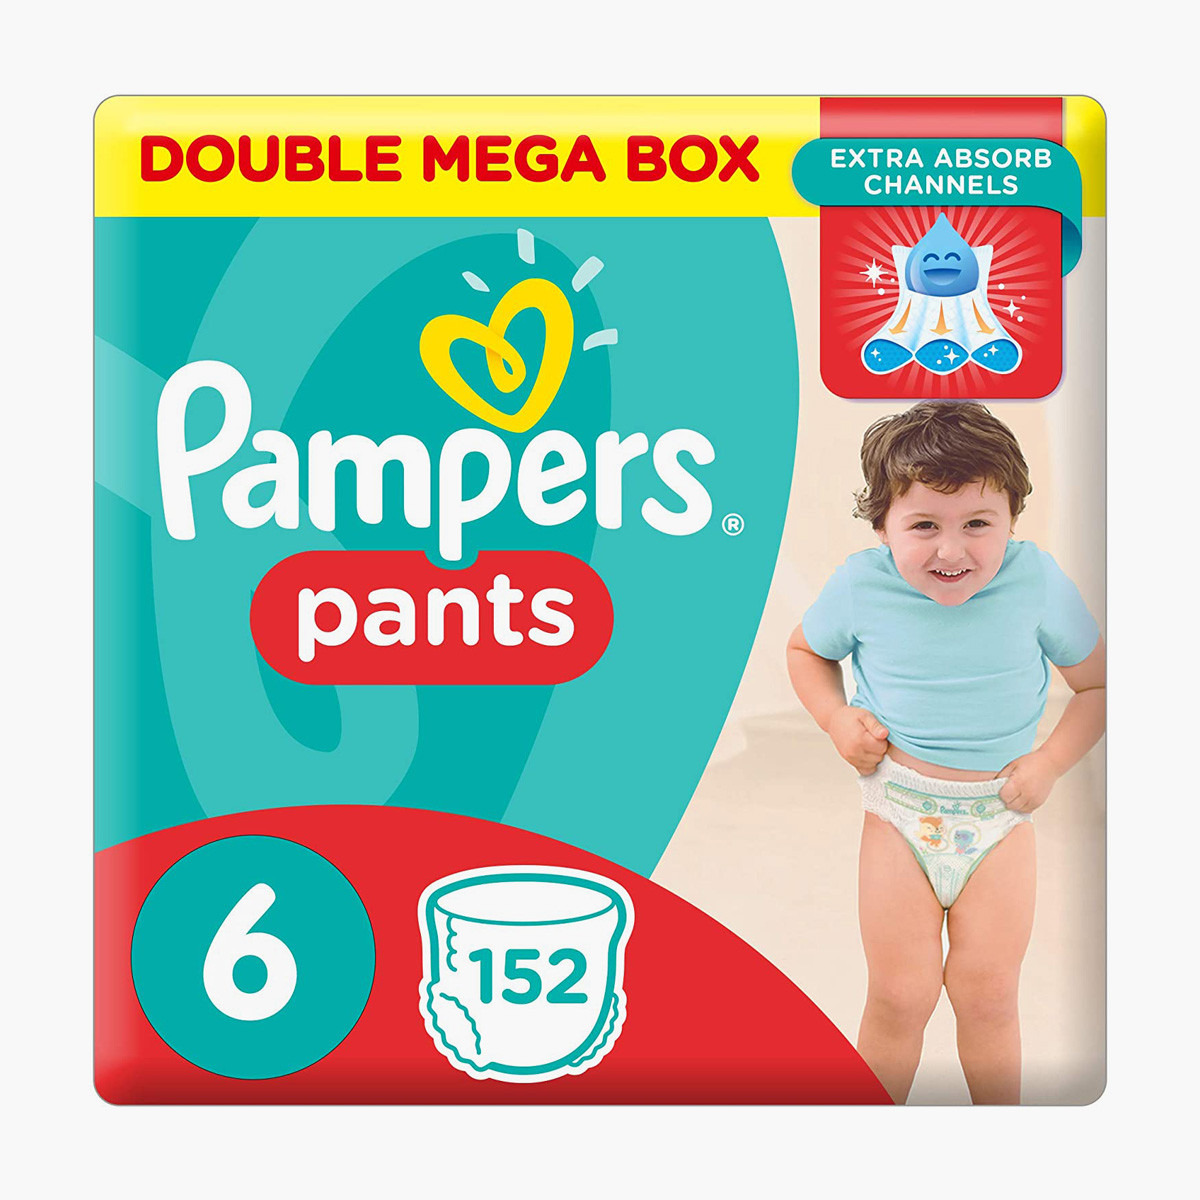 Buy Pampers Premium Care Pants, Large size baby diapers (L), 2 Count,  Softest ever Pampers pants Online at Low Prices in India - Amazon.in